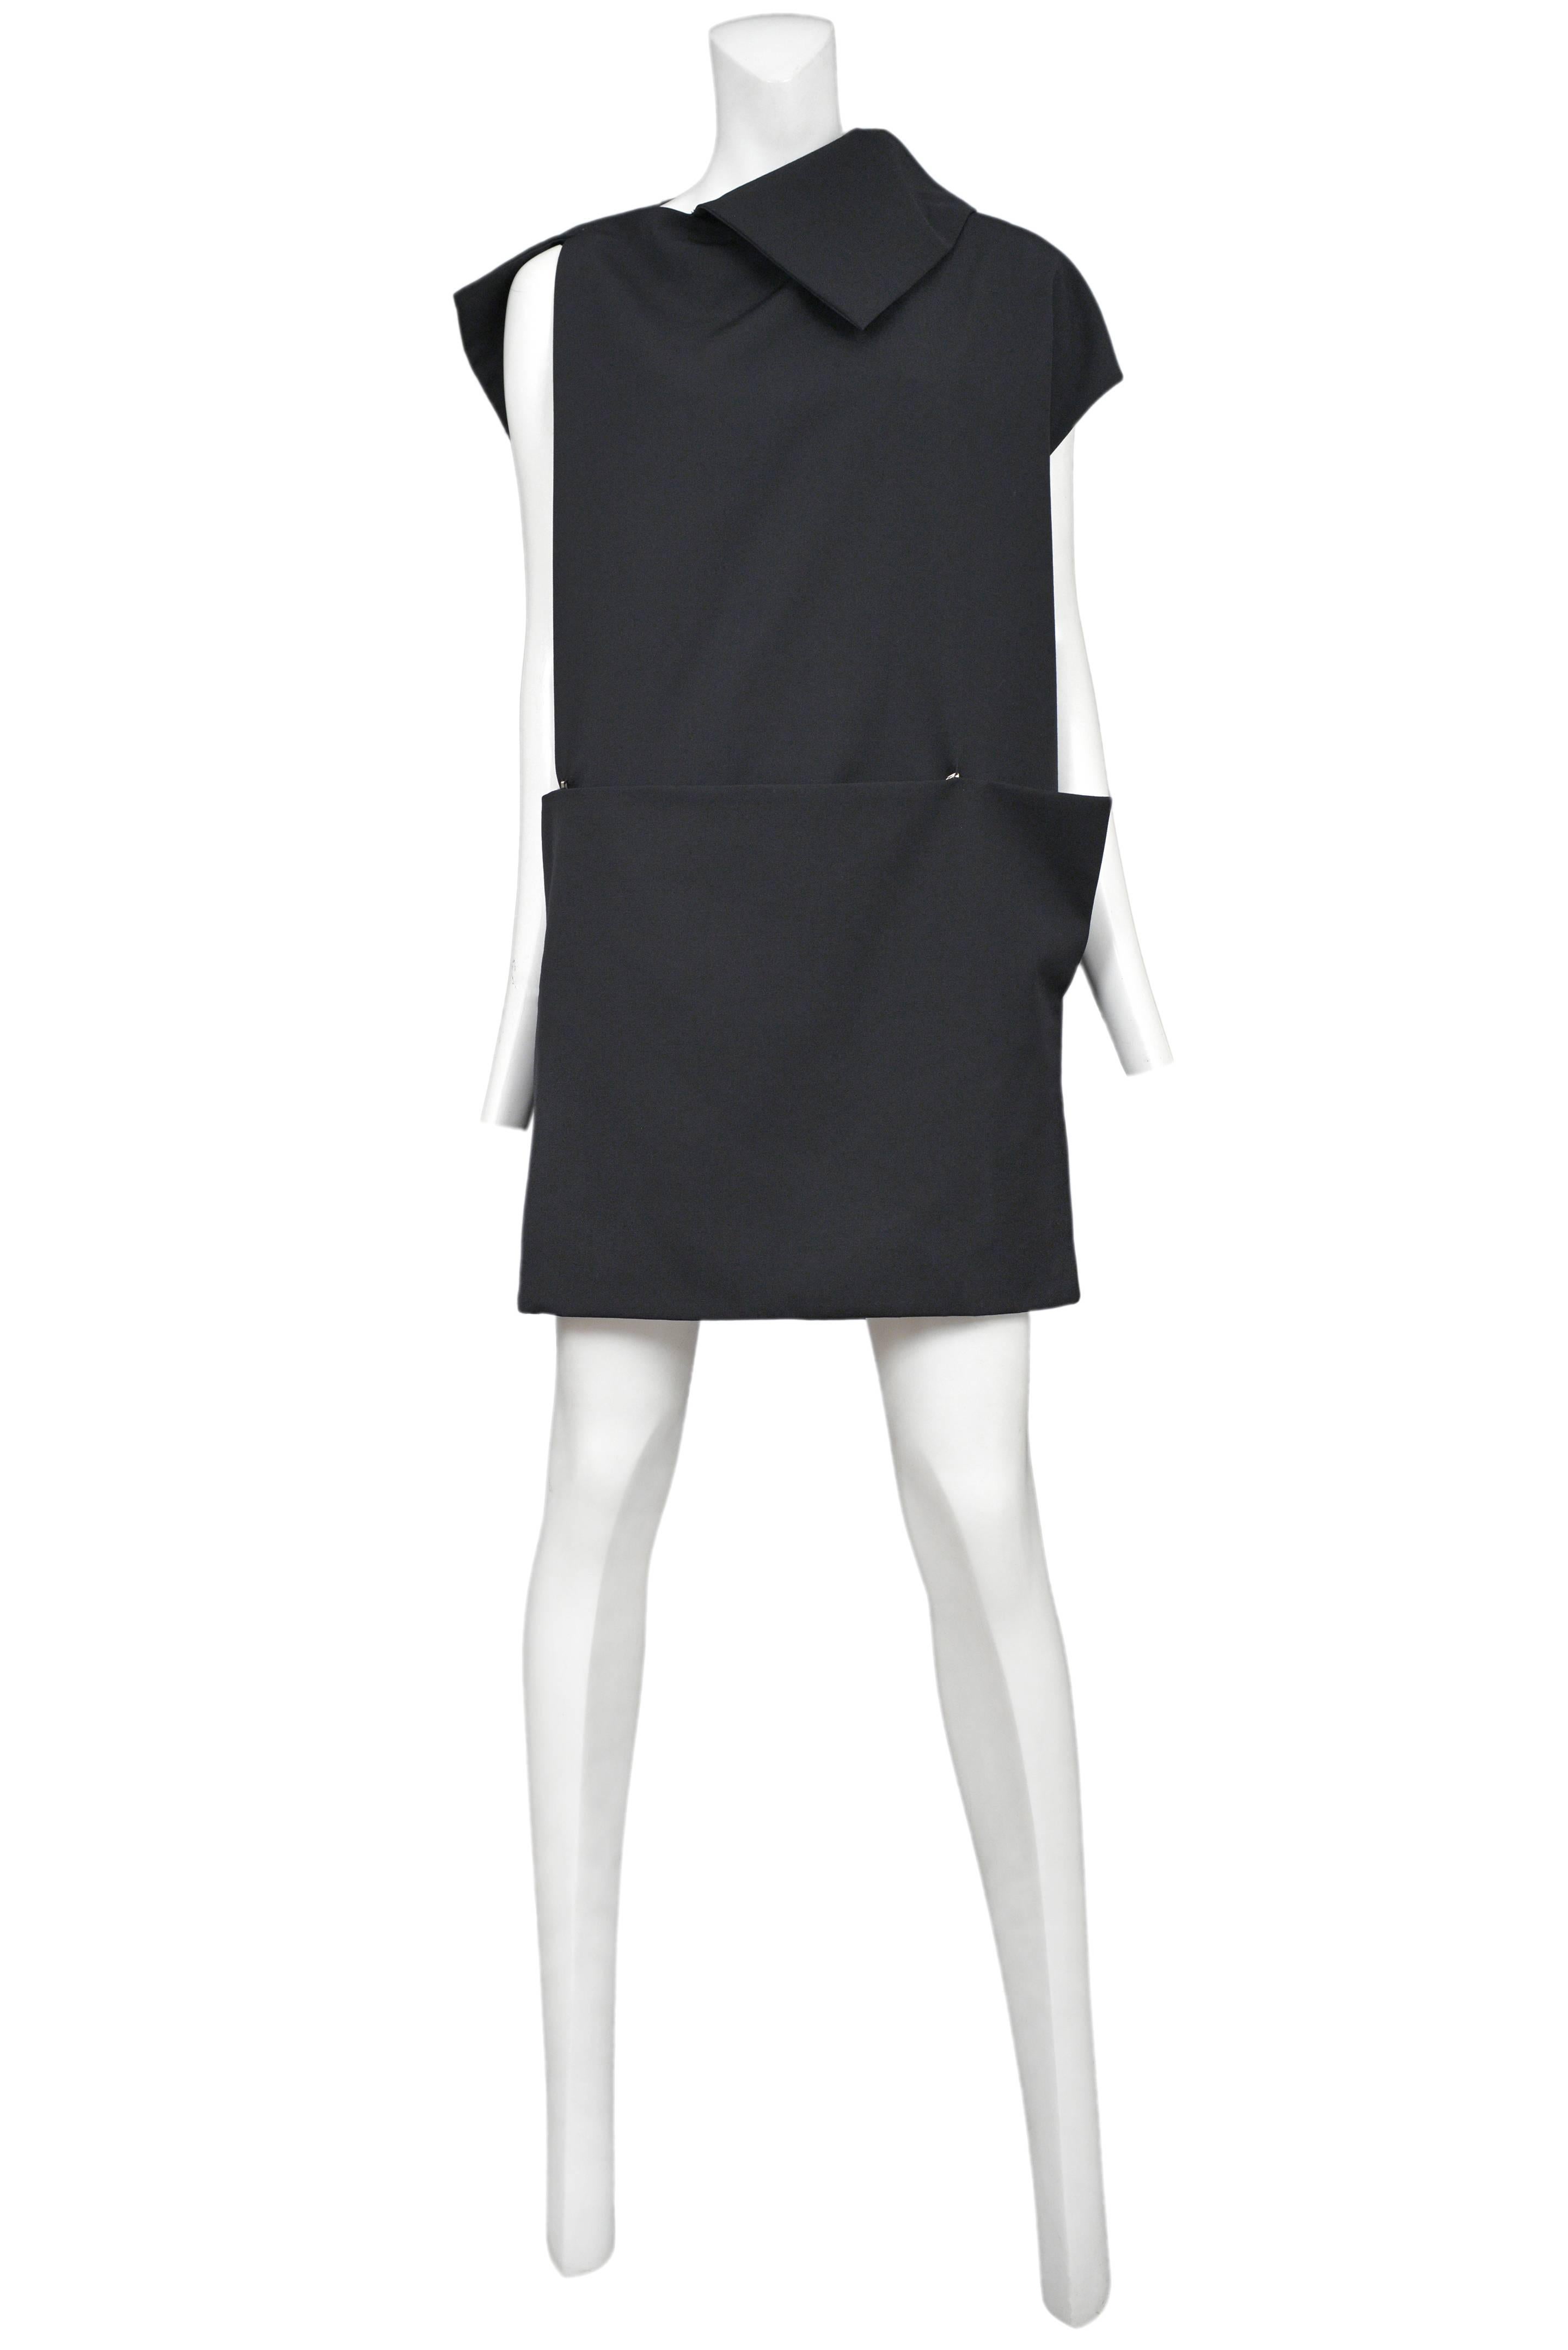 Vintage Yohji Yamamoto black origami style mini dress featuring an abstract folded collar and a skirt panel that folds and wraps across the waist and is kept in place with hook & eyes.
Please inquire for additional images.